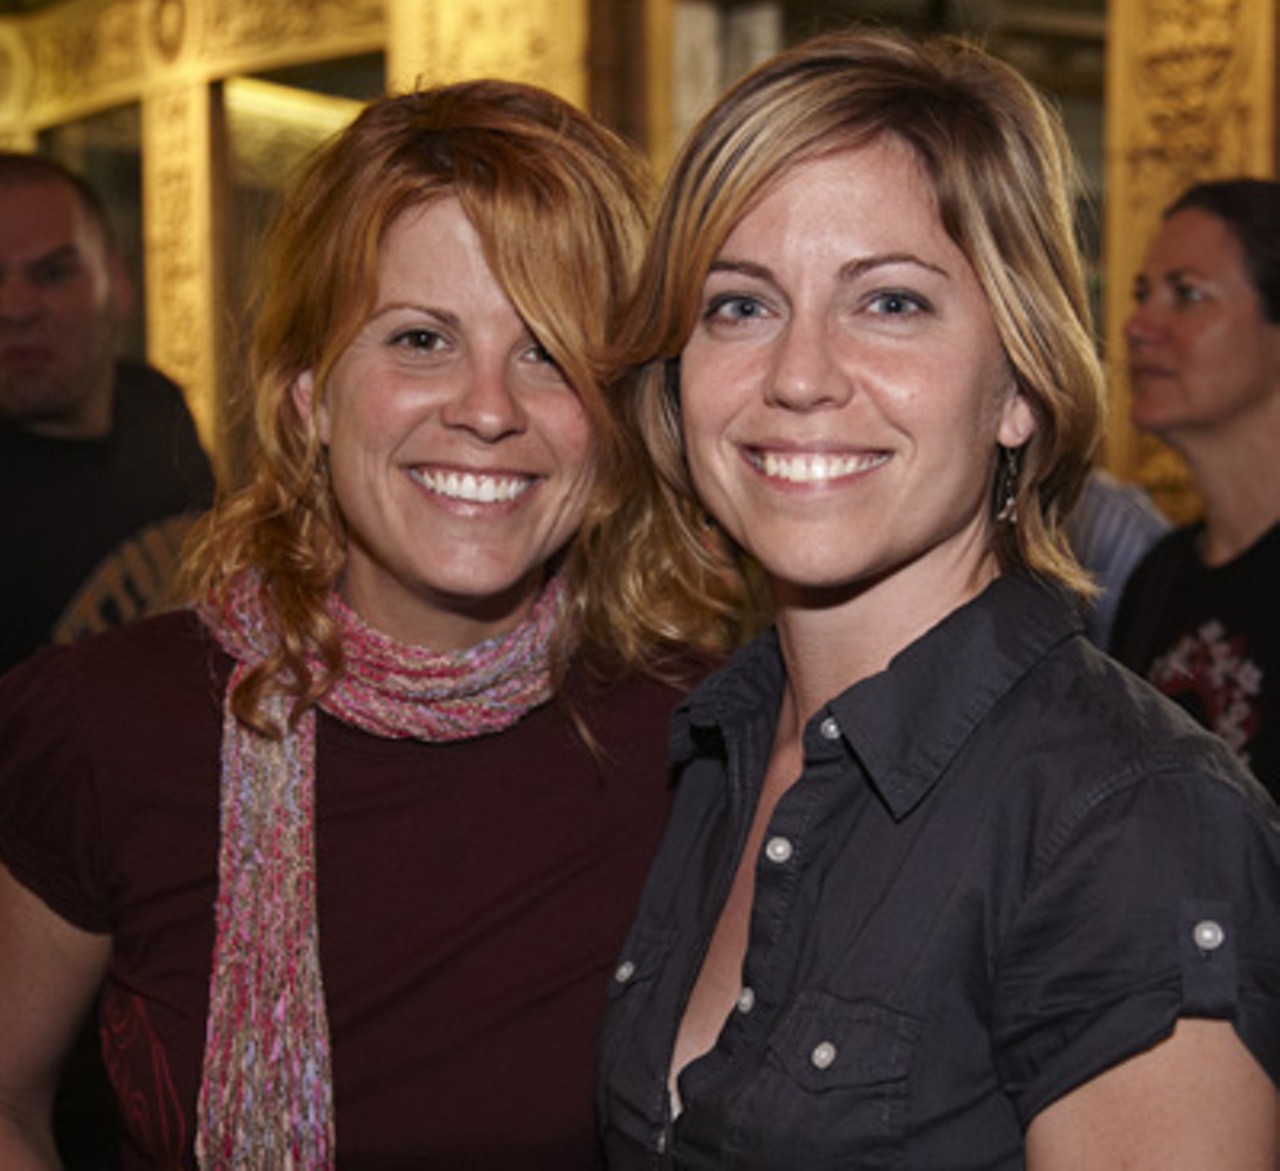 These ladies were happy to support KDHX's "Midwest Mayhem."